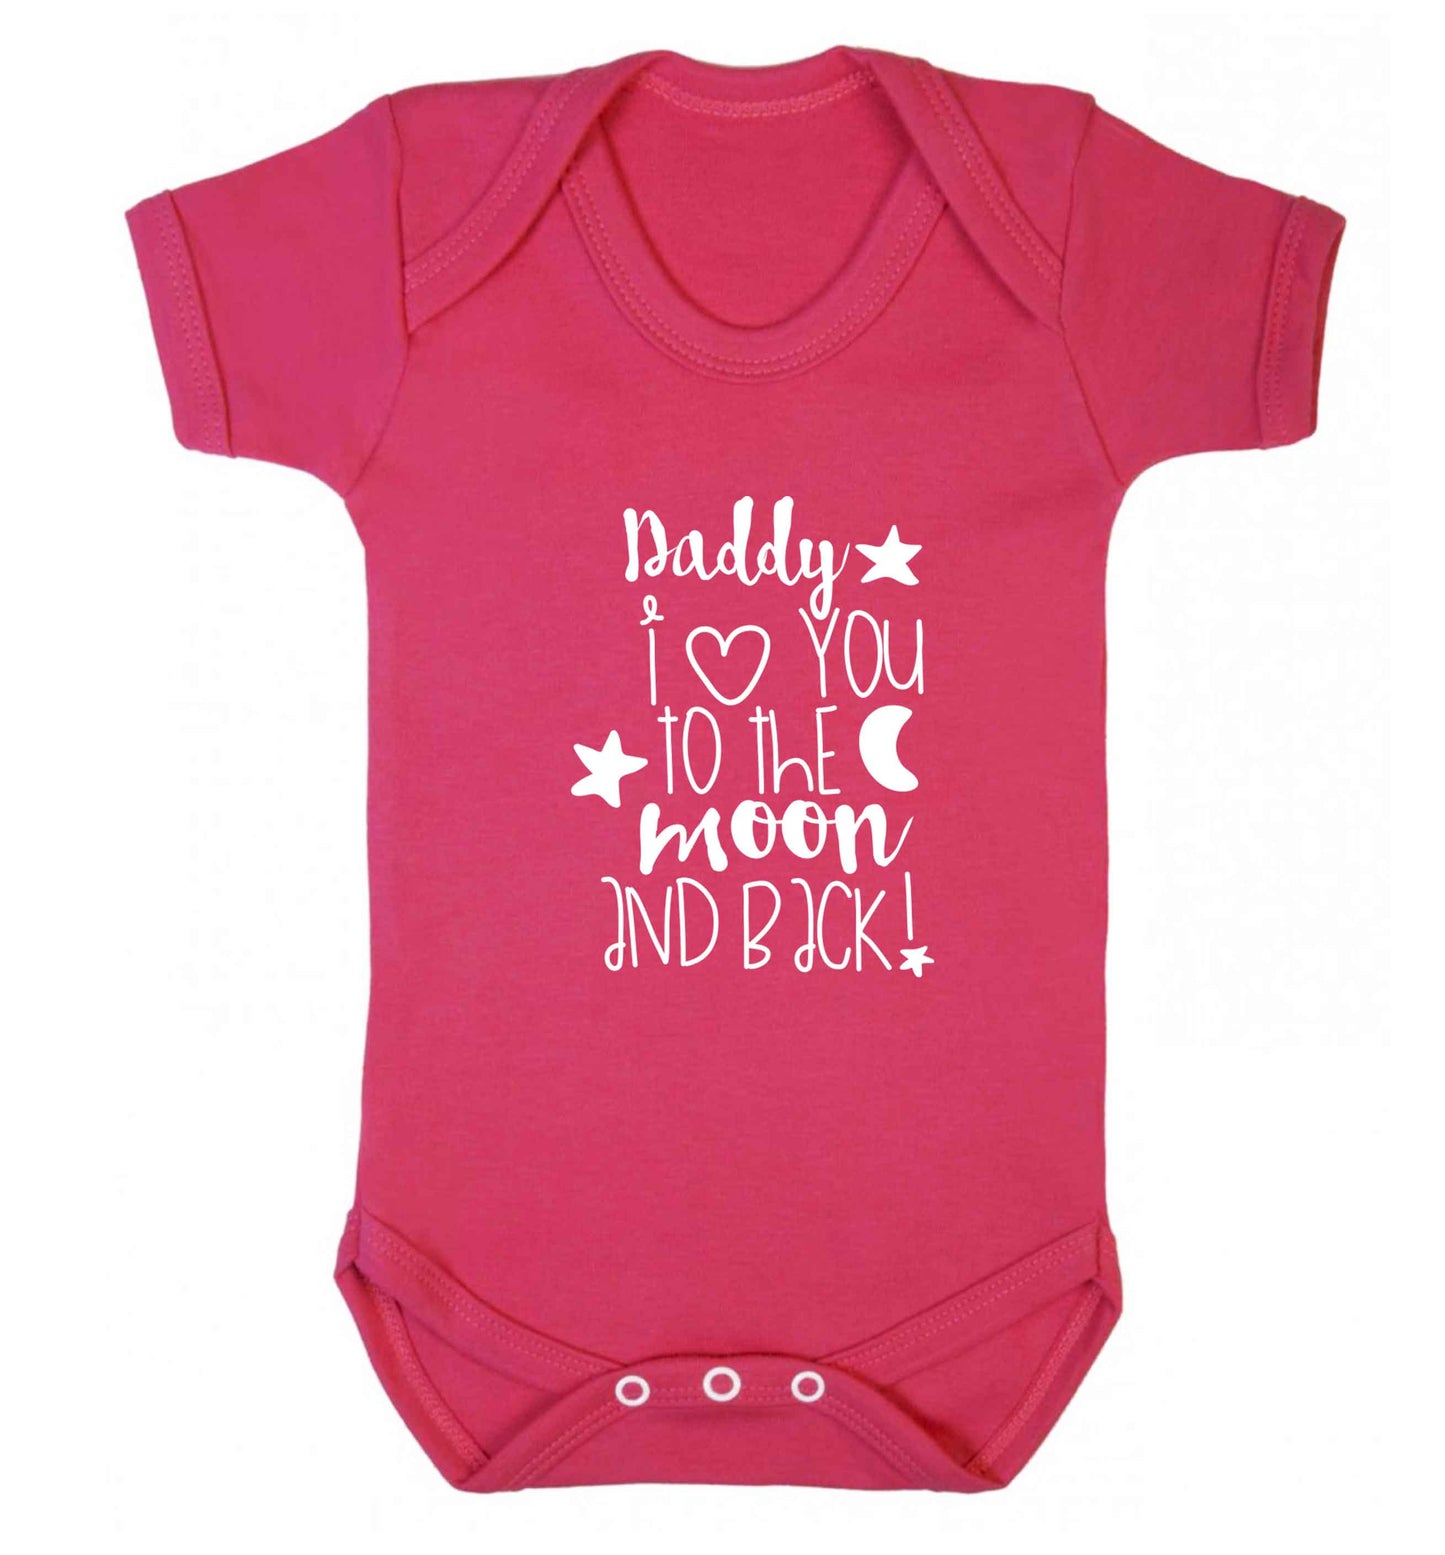 Daddy I love you to the moon and back baby vest dark pink 18-24 months